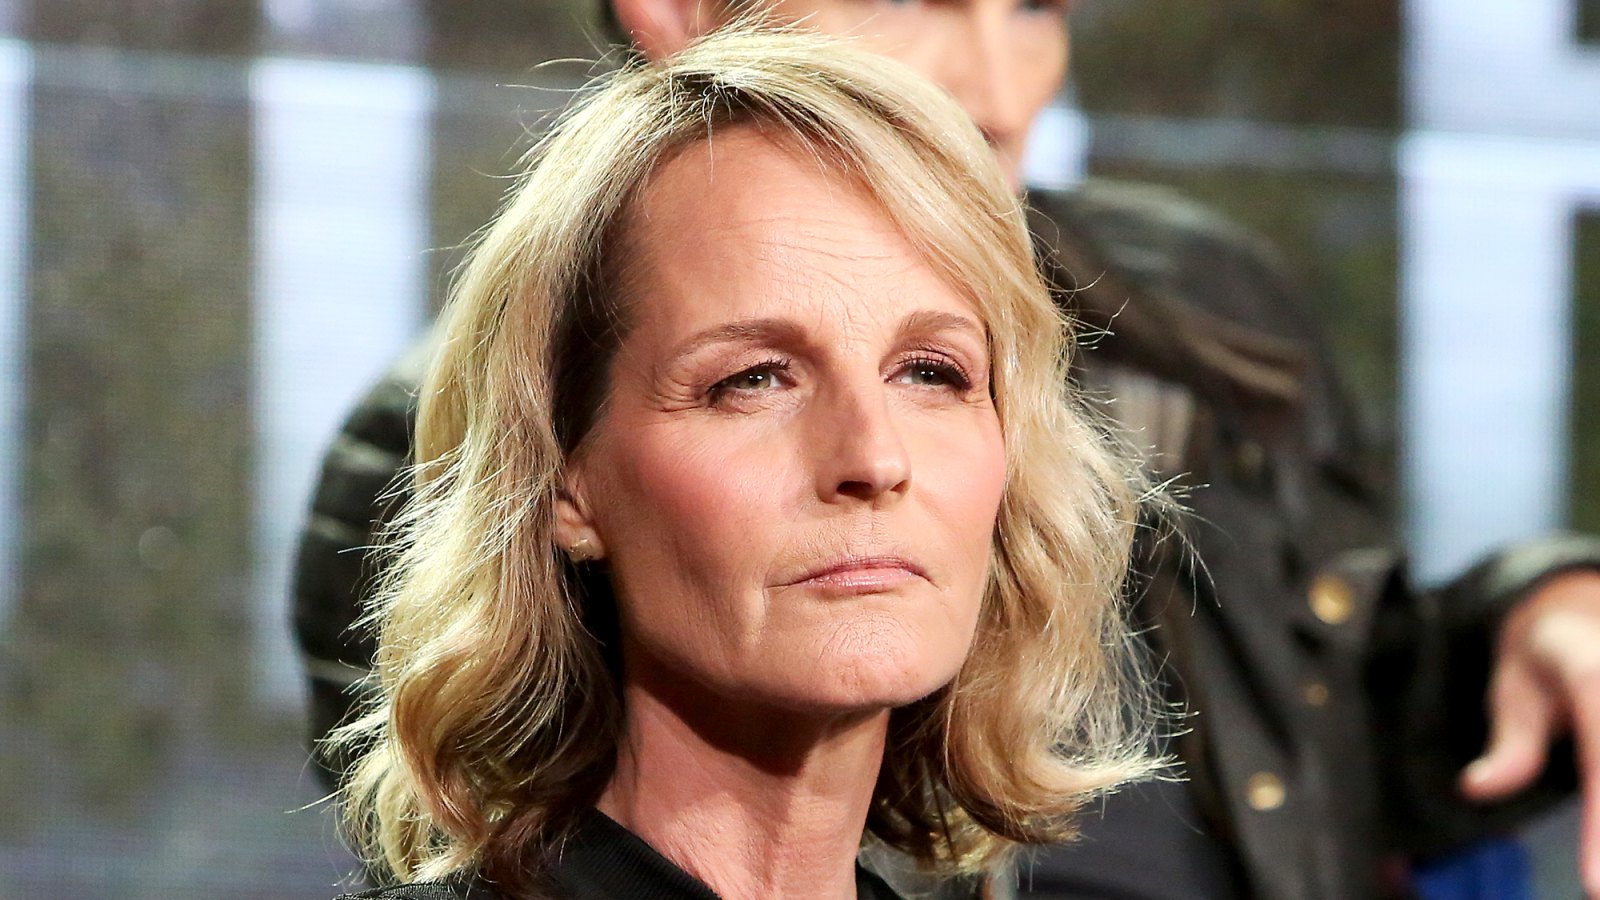 Helen-Hunt-Hospitalized-After-Car-Rolls-Over-in-Traffic-Accident